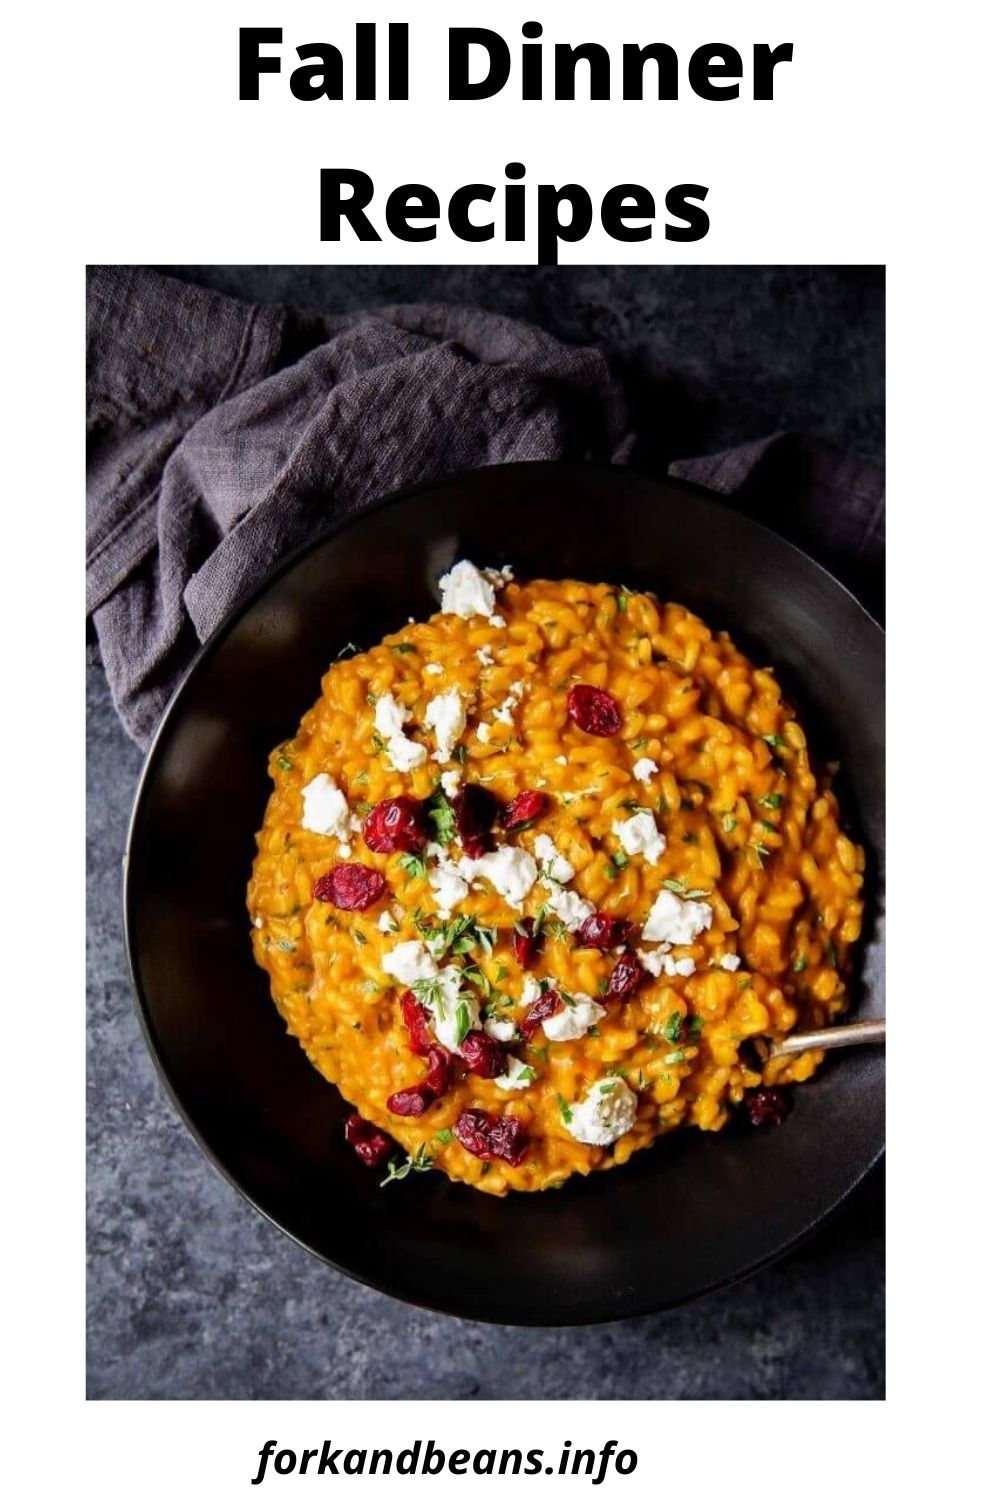 Pumpkin Risotto with Goat Cheese & Dried Cranberries